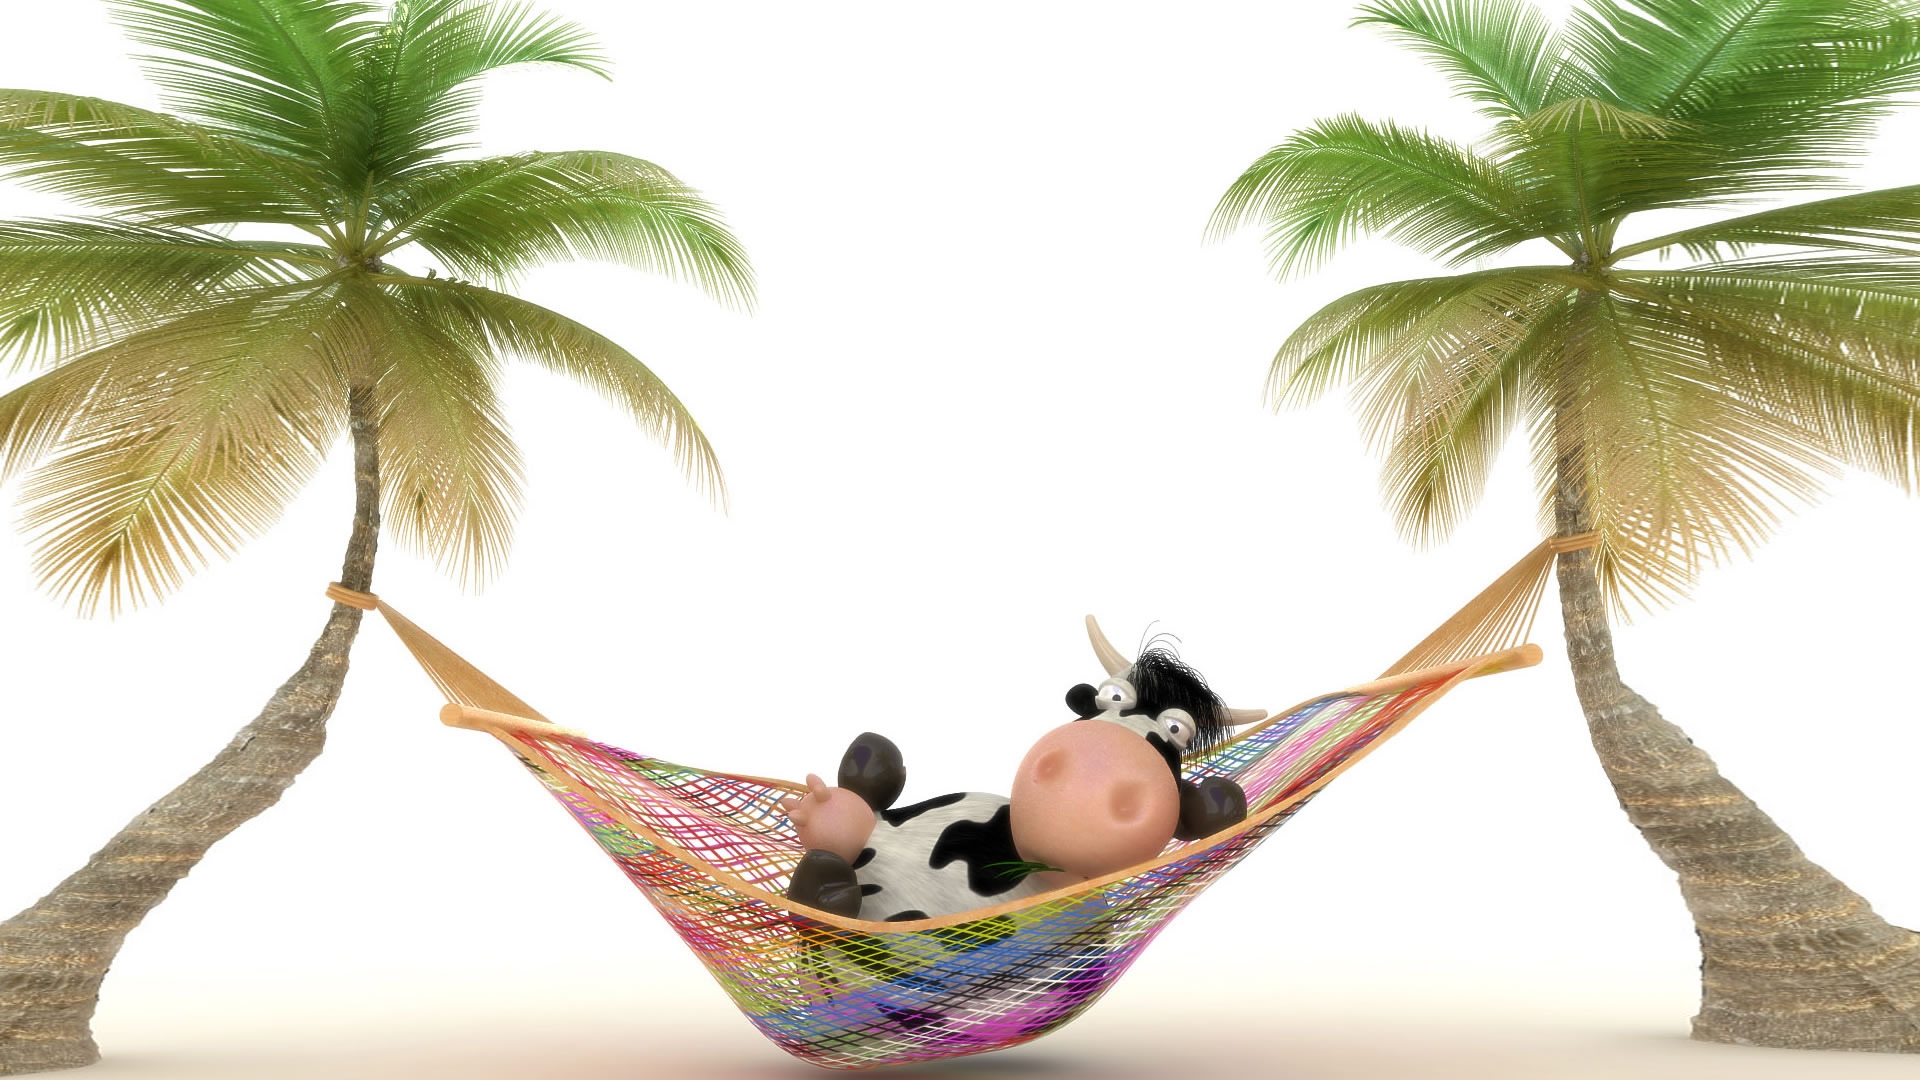 Cow relaxing in Hammock for 1920 x 1080 HDTV 1080p resolution